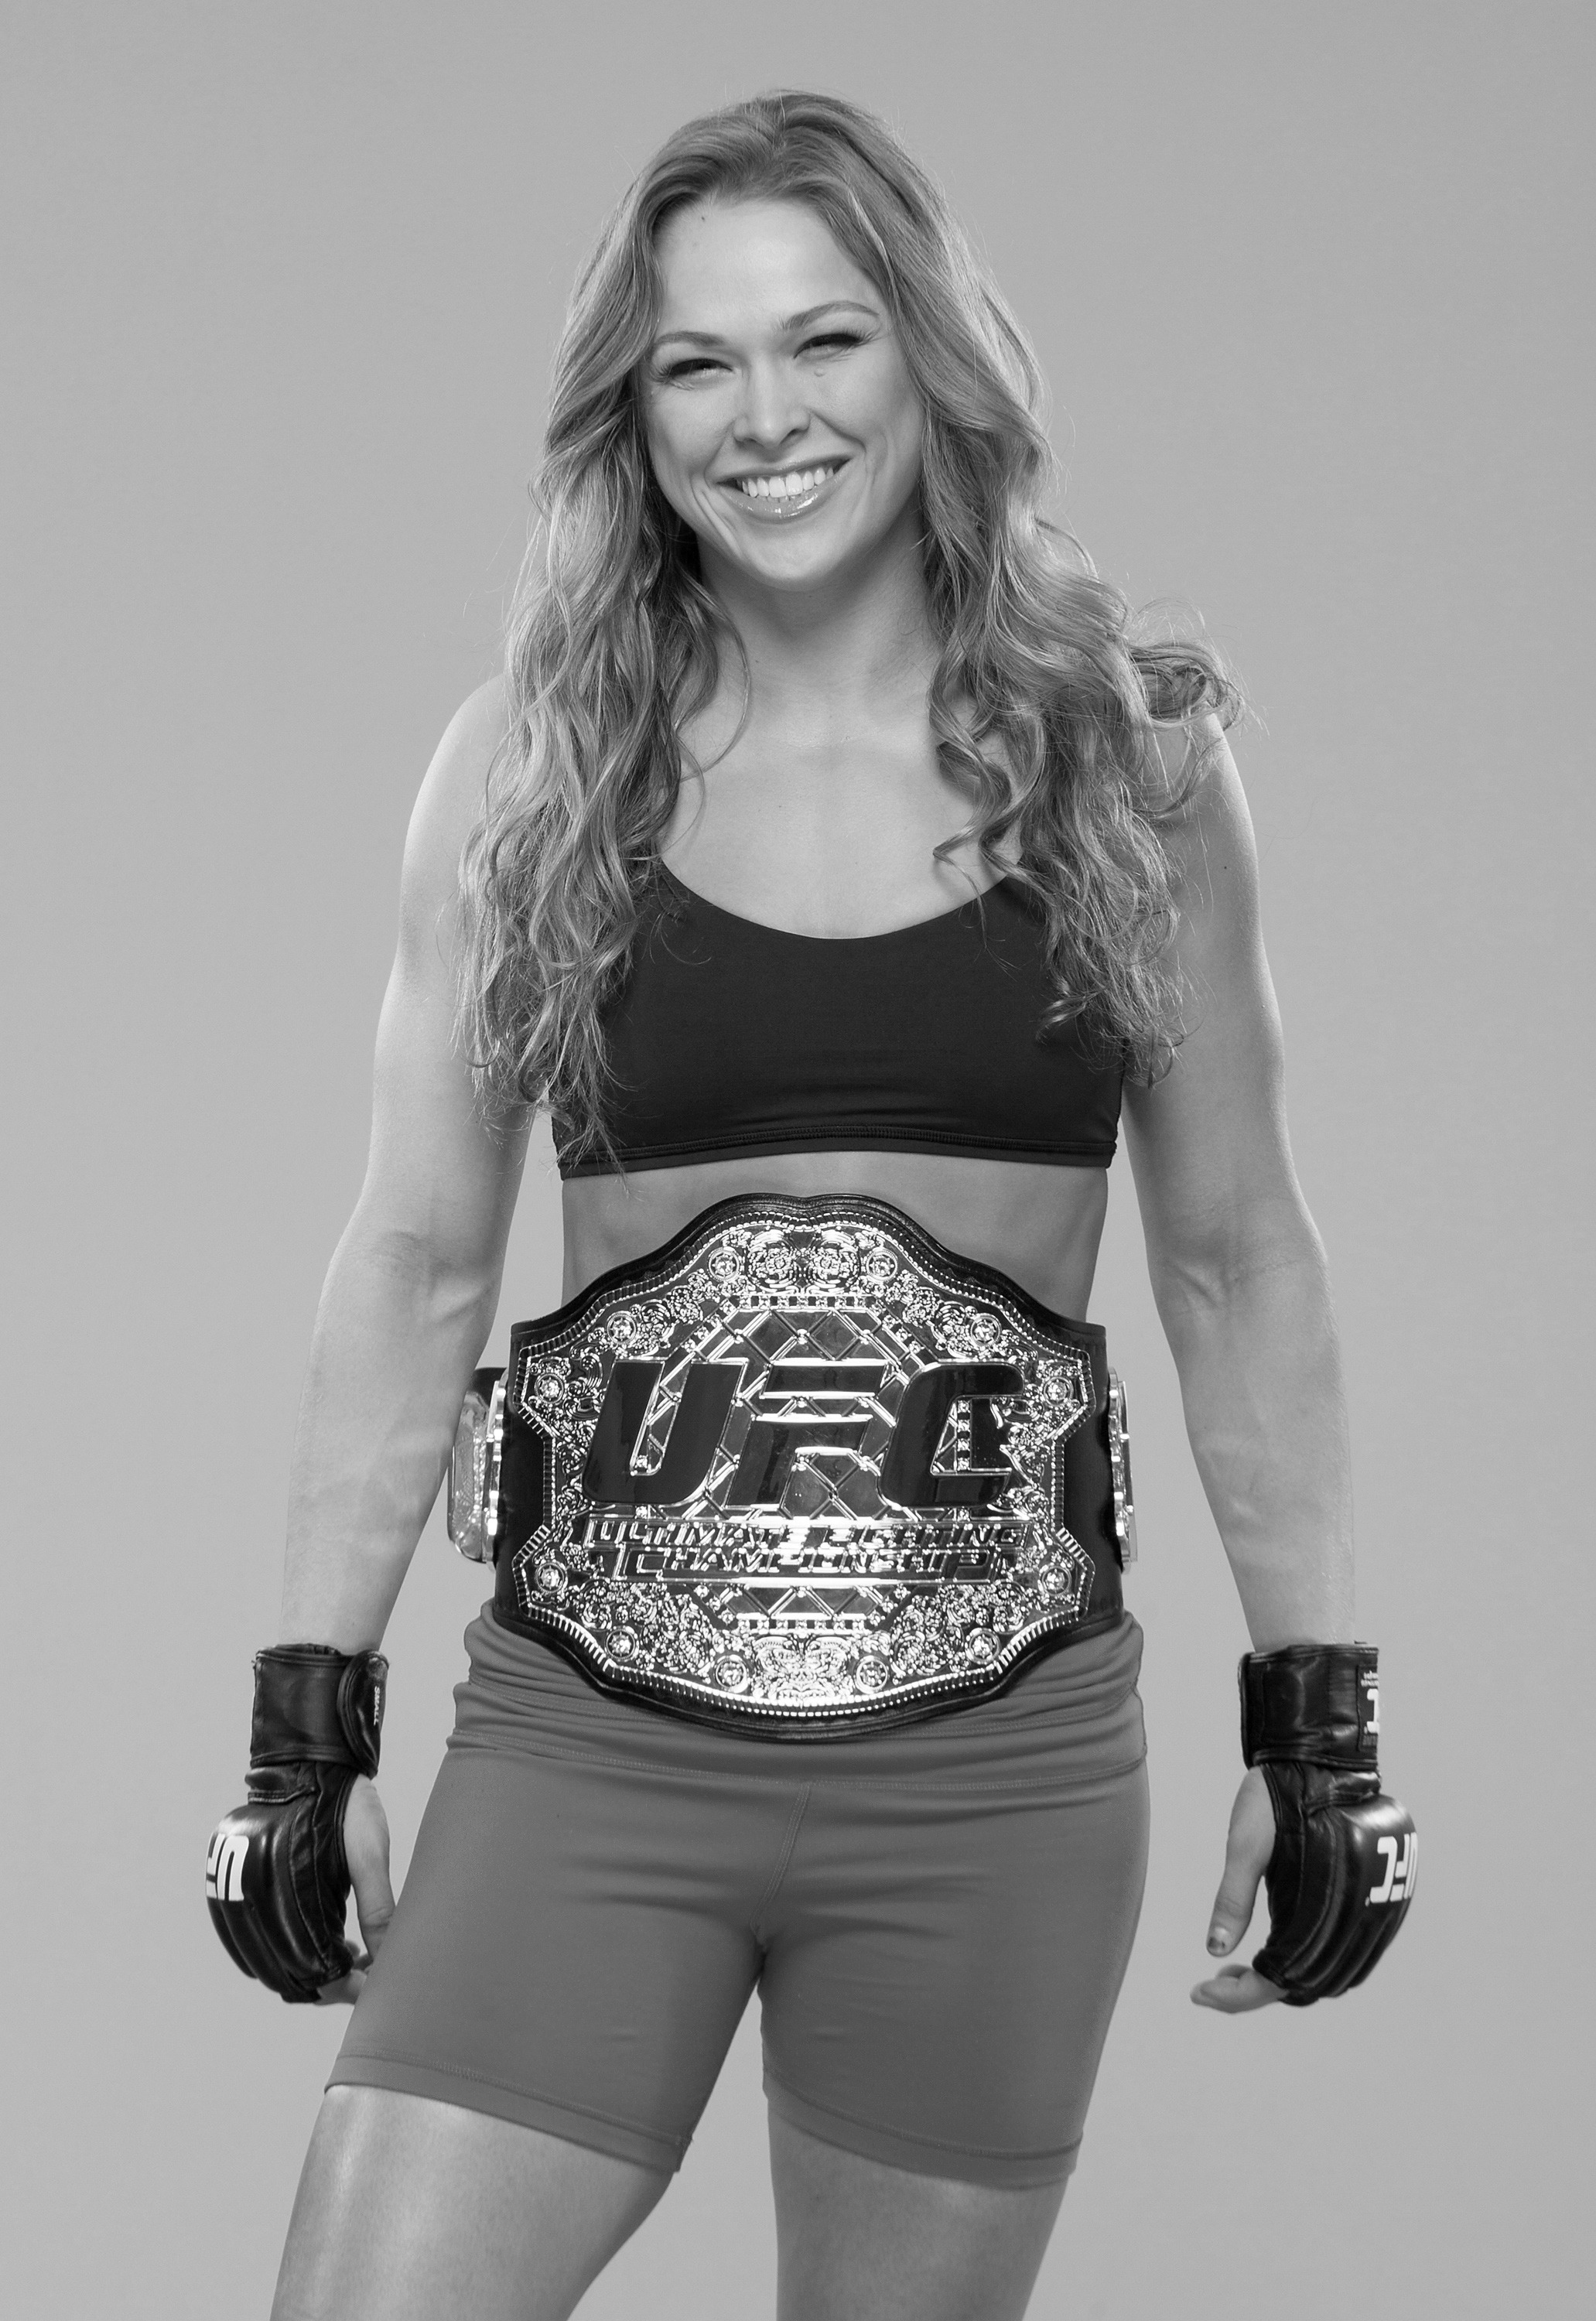 ronda-rousey-10-questions-athlete